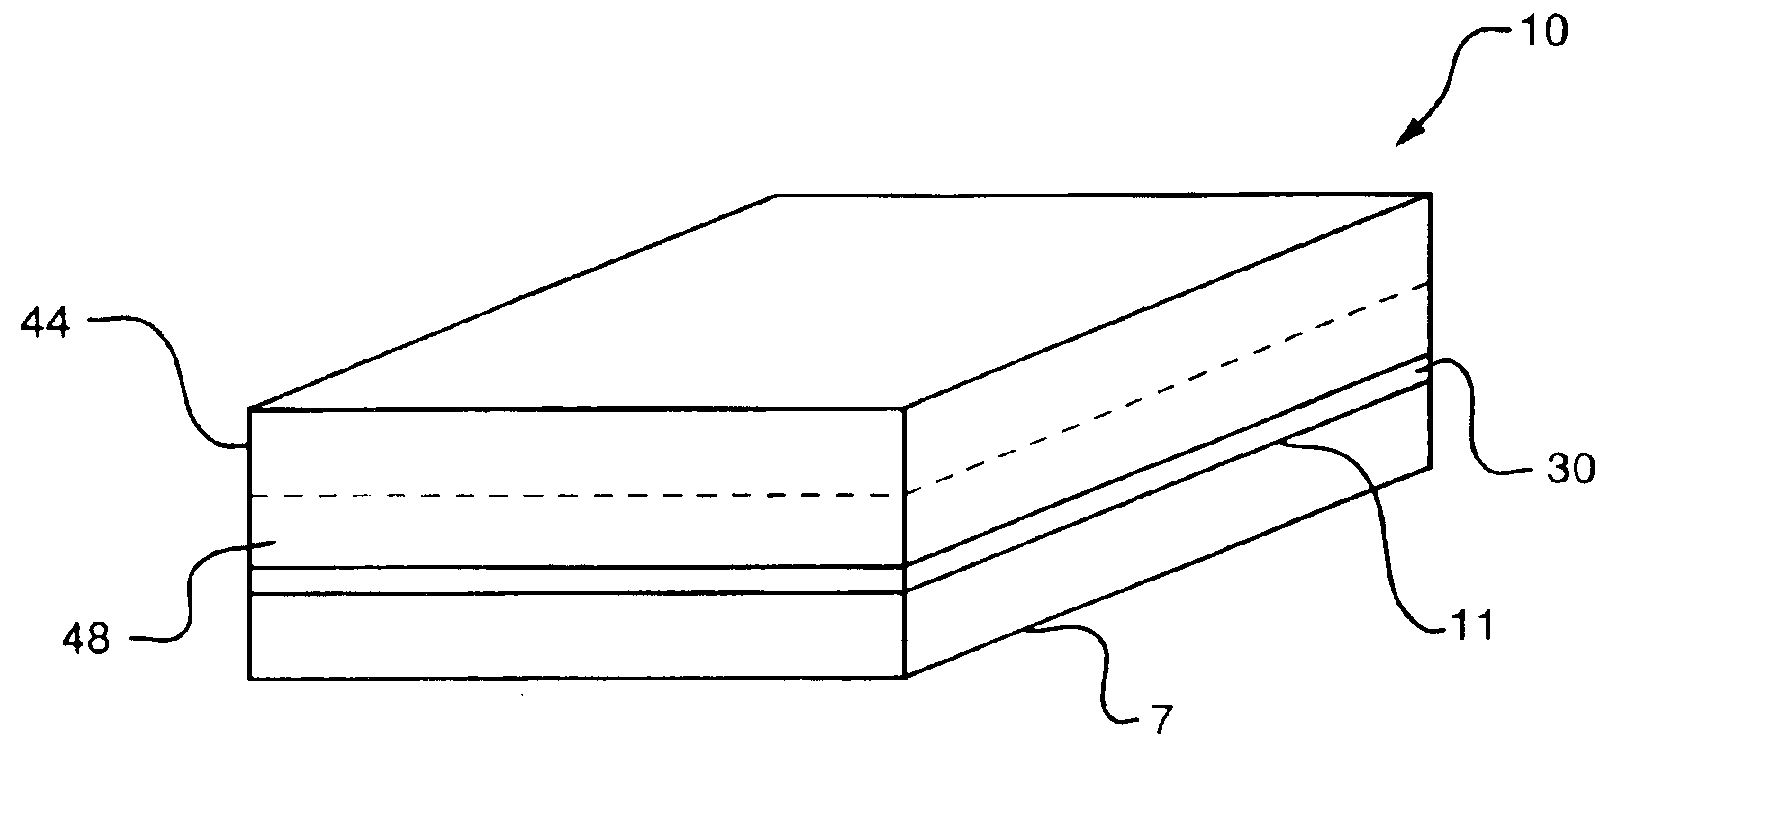 Modified diffusion layer for use in a fuel cell system